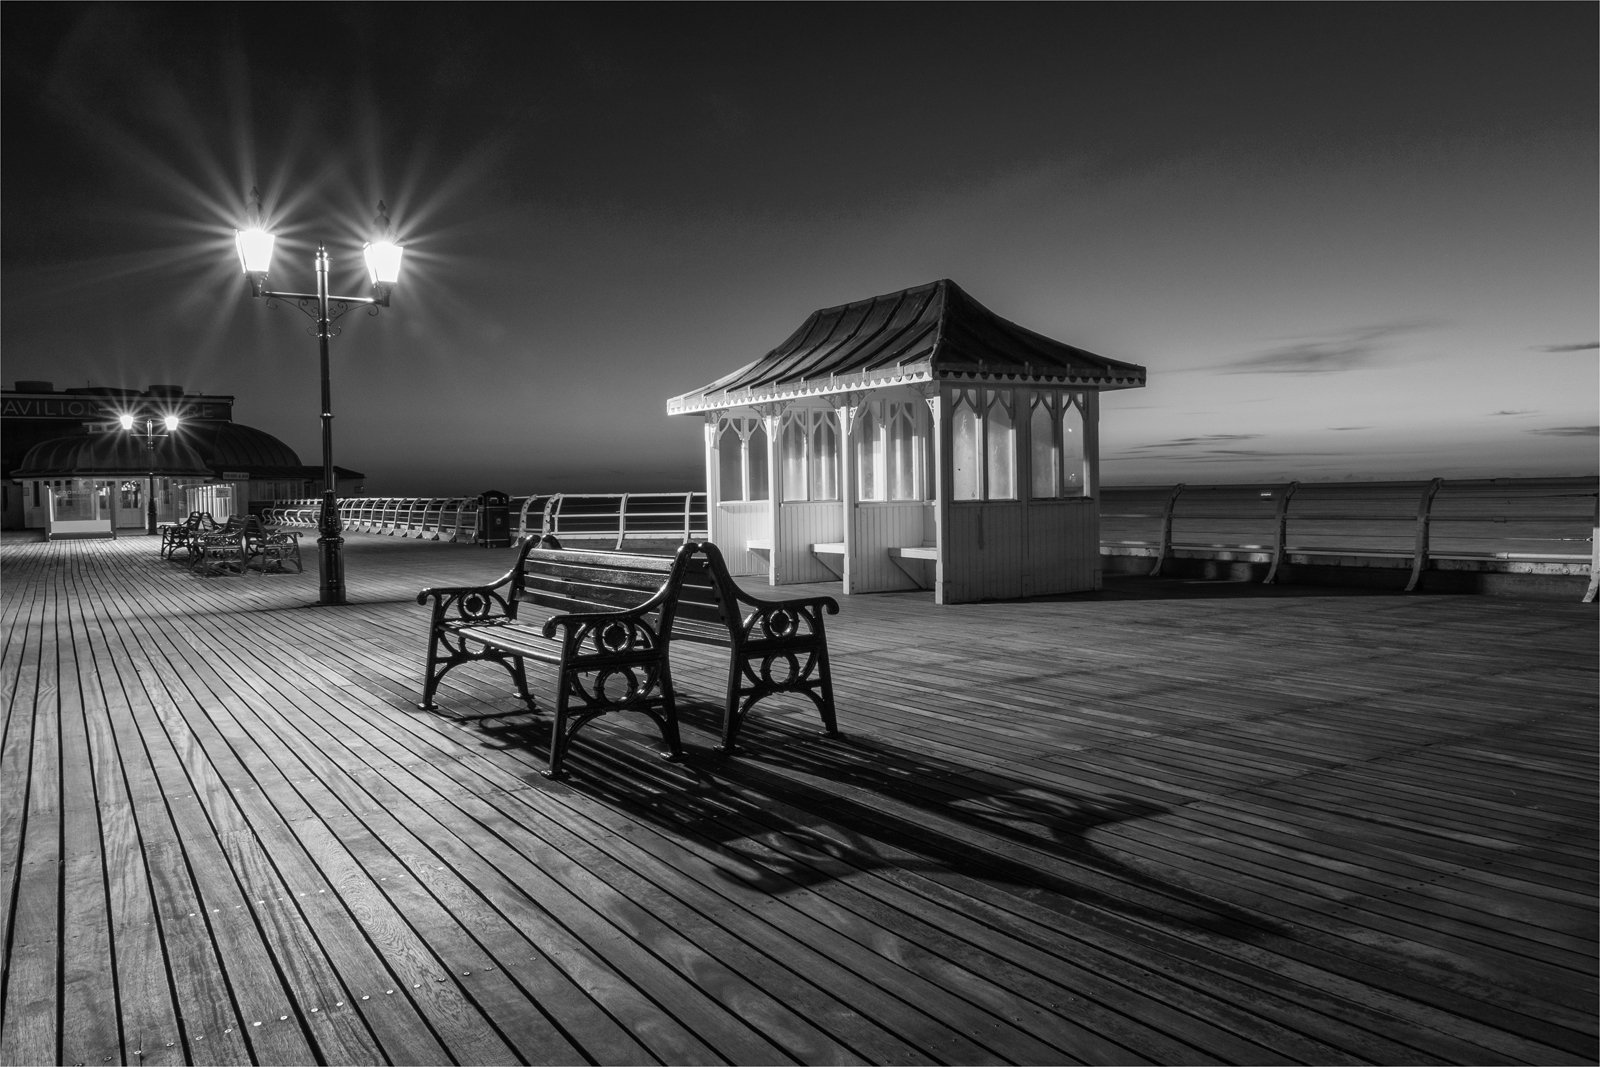 SHADOWS ON THE PIER - Andrew Loveday